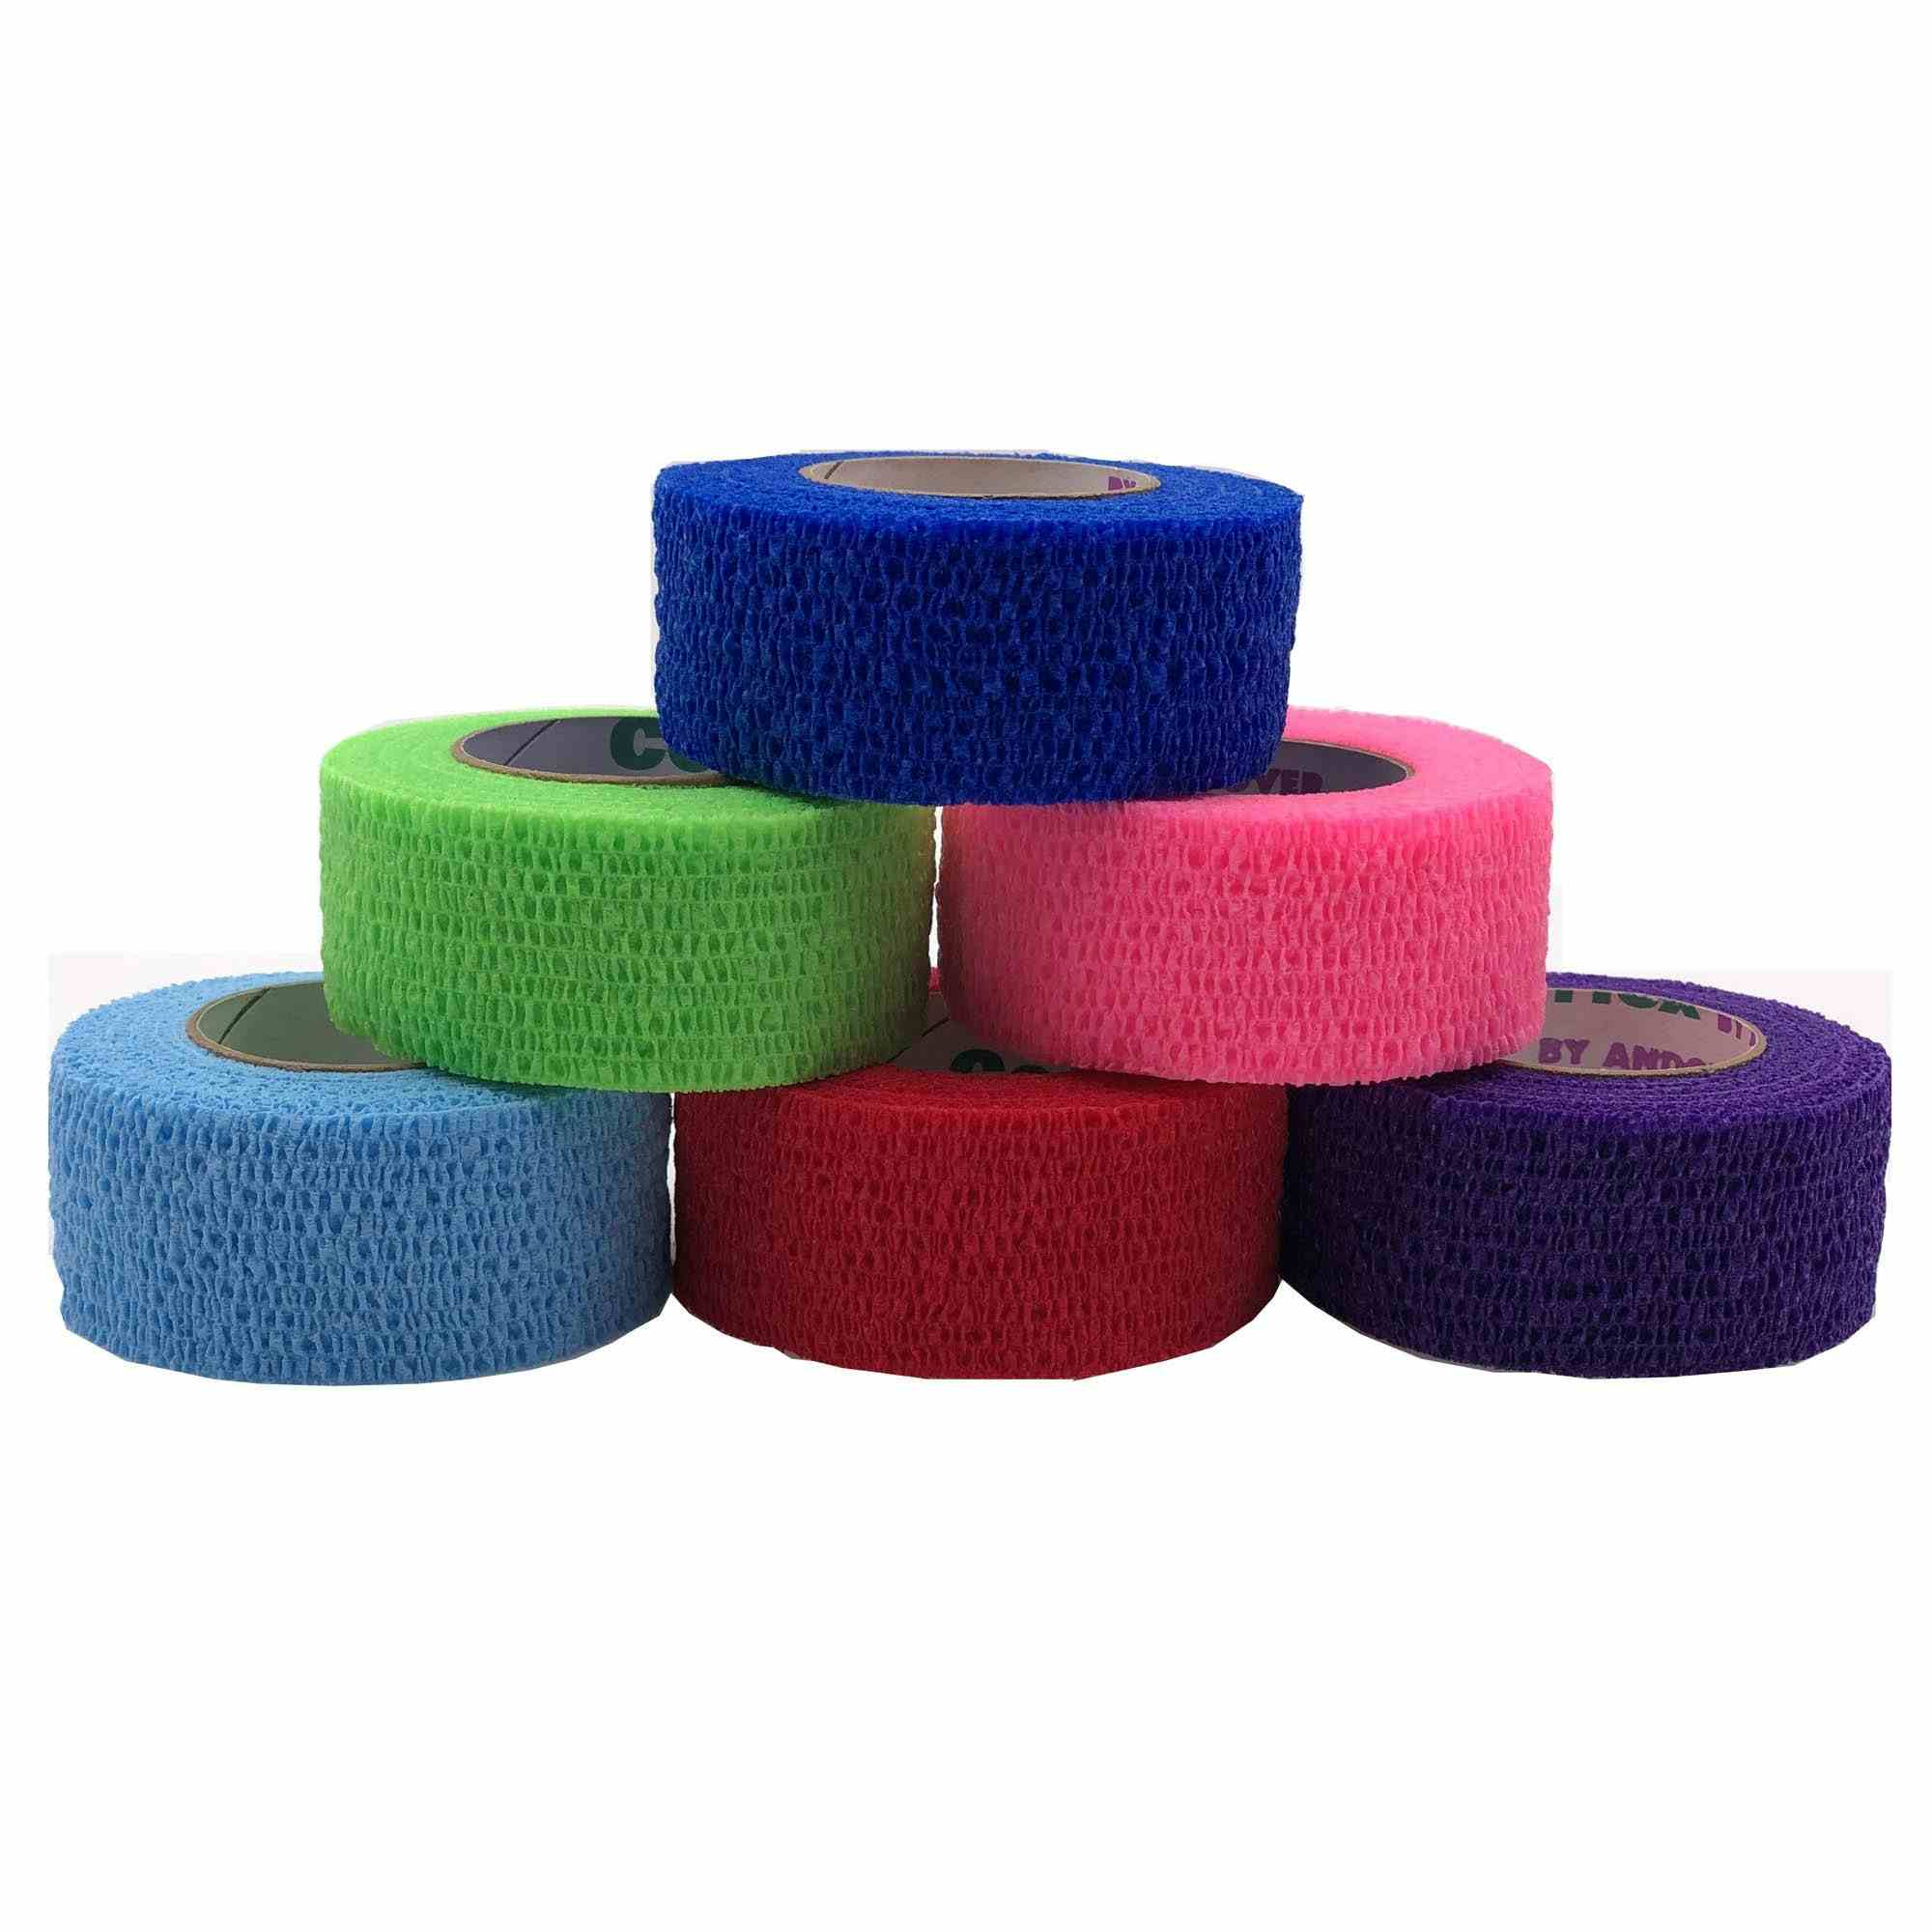 CoFlex NL Cohesive Bandage, Assorted Colors, 2" X 5 yd, 5200CP, Case of 36